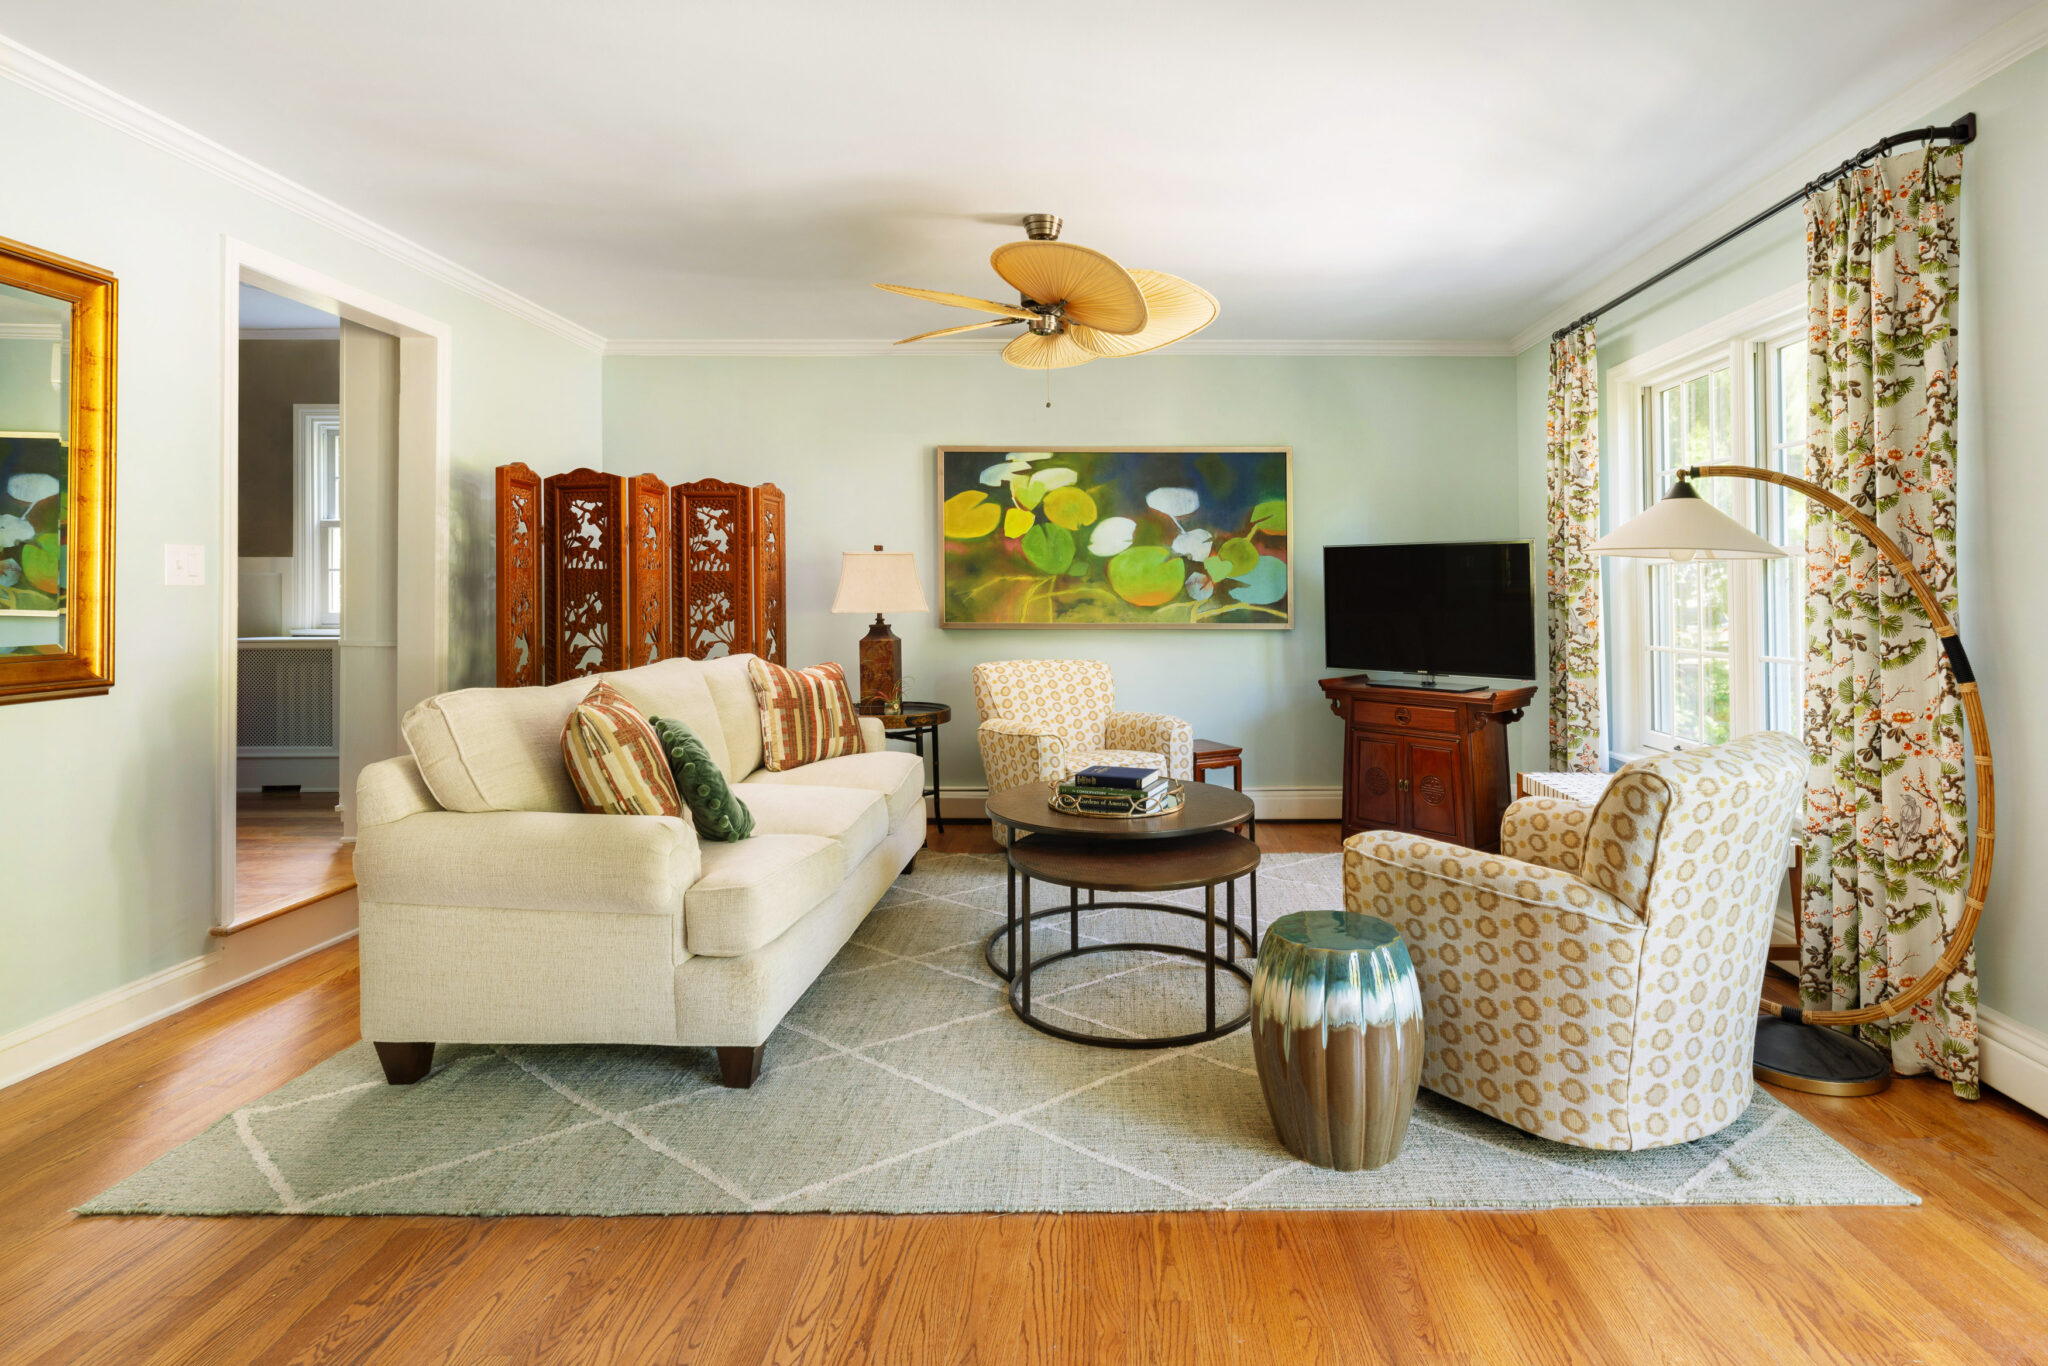 In The Press: Tips for Giving Your Home a Pop of Color